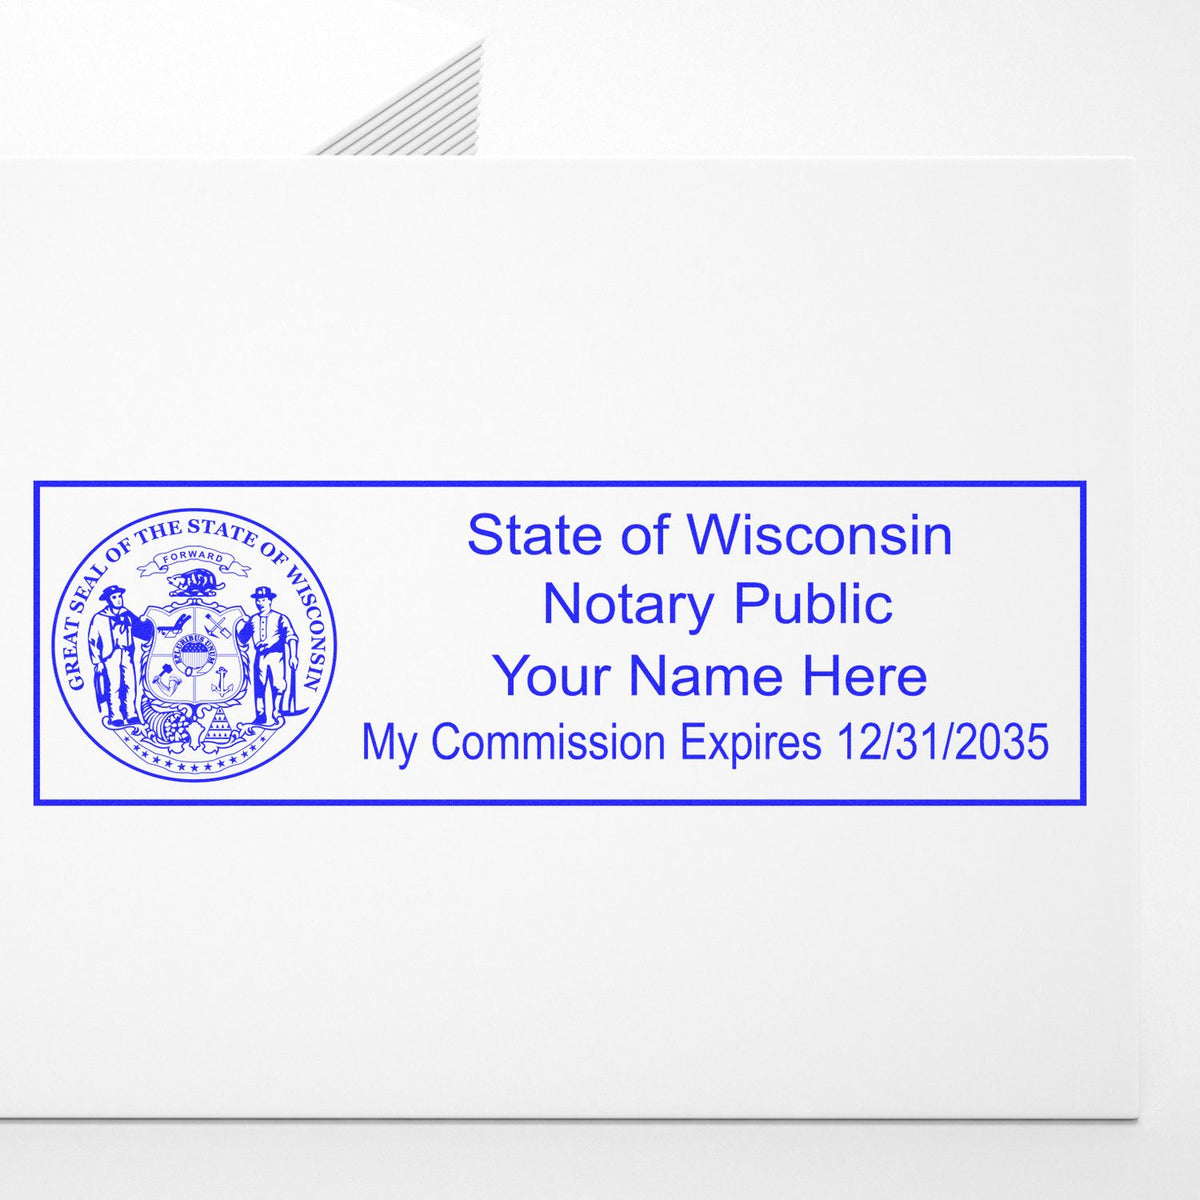 This paper is stamped with a sample imprint of the Wooden Handle Wisconsin State Seal Notary Public Stamp, signifying its quality and reliability.